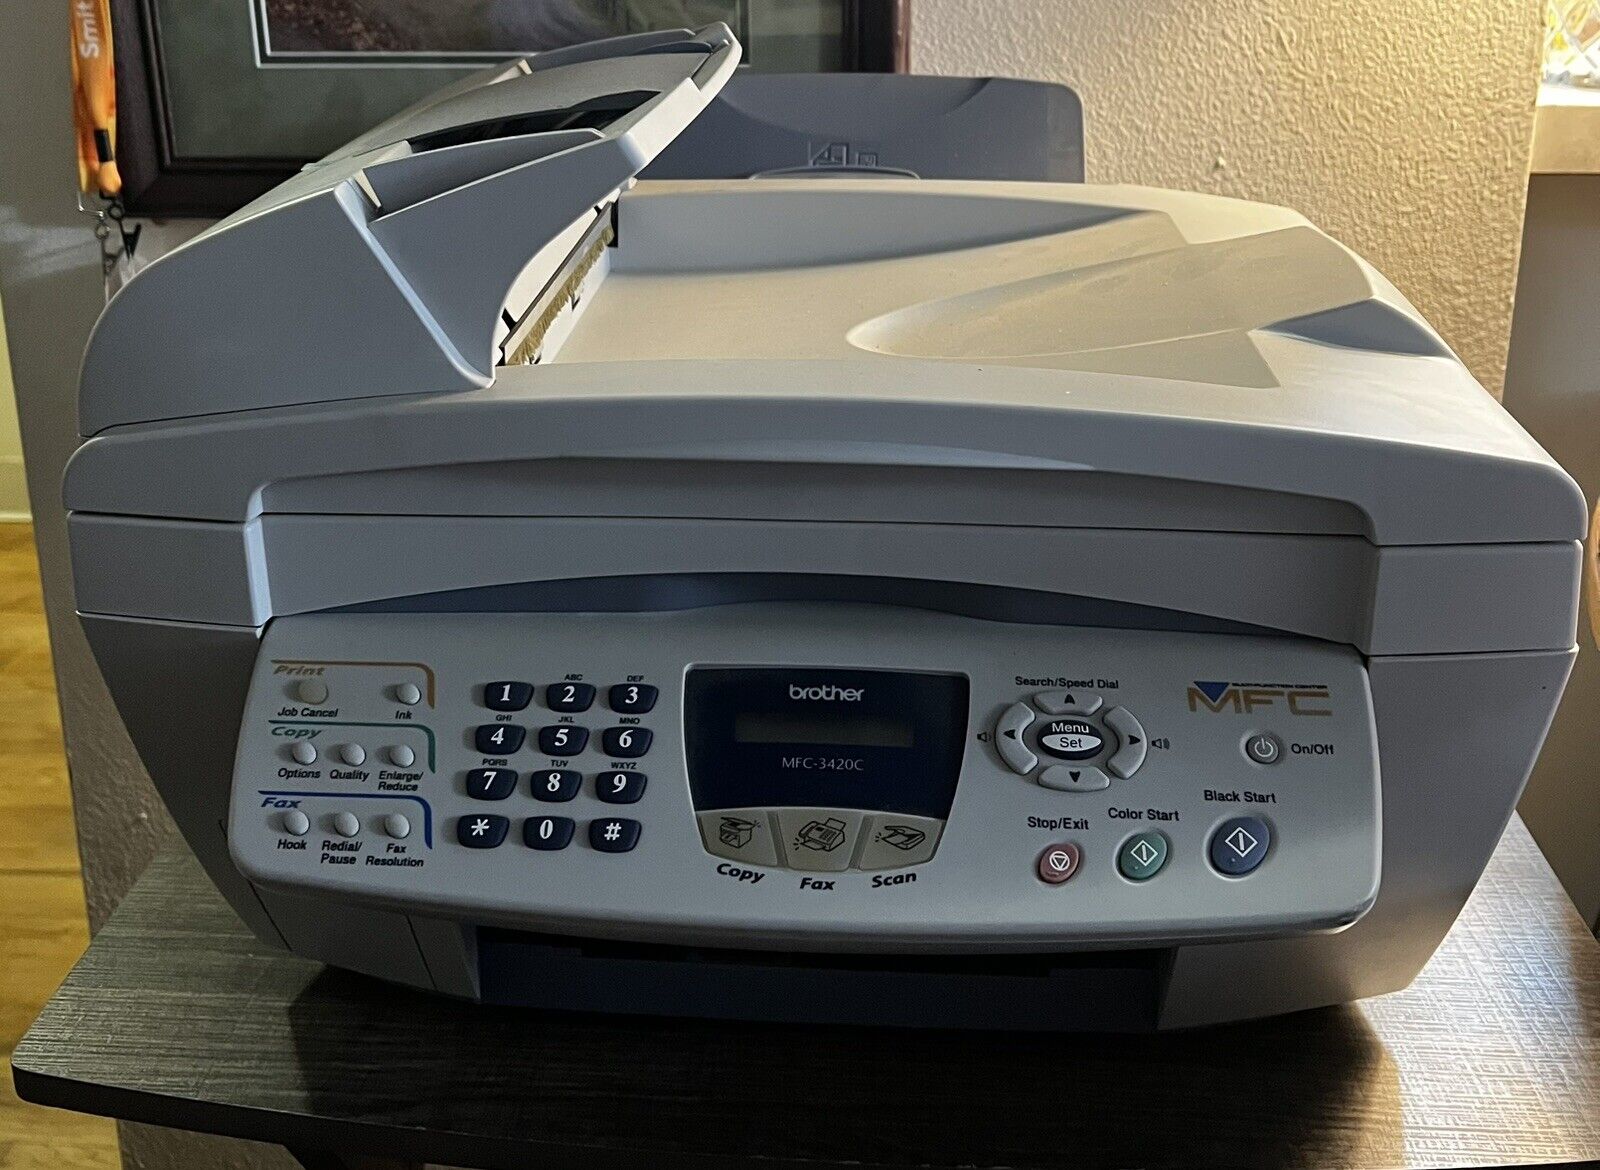 Brother MFC-3420C All-In-One Inkjet Printer Used And In Great Condition - Power